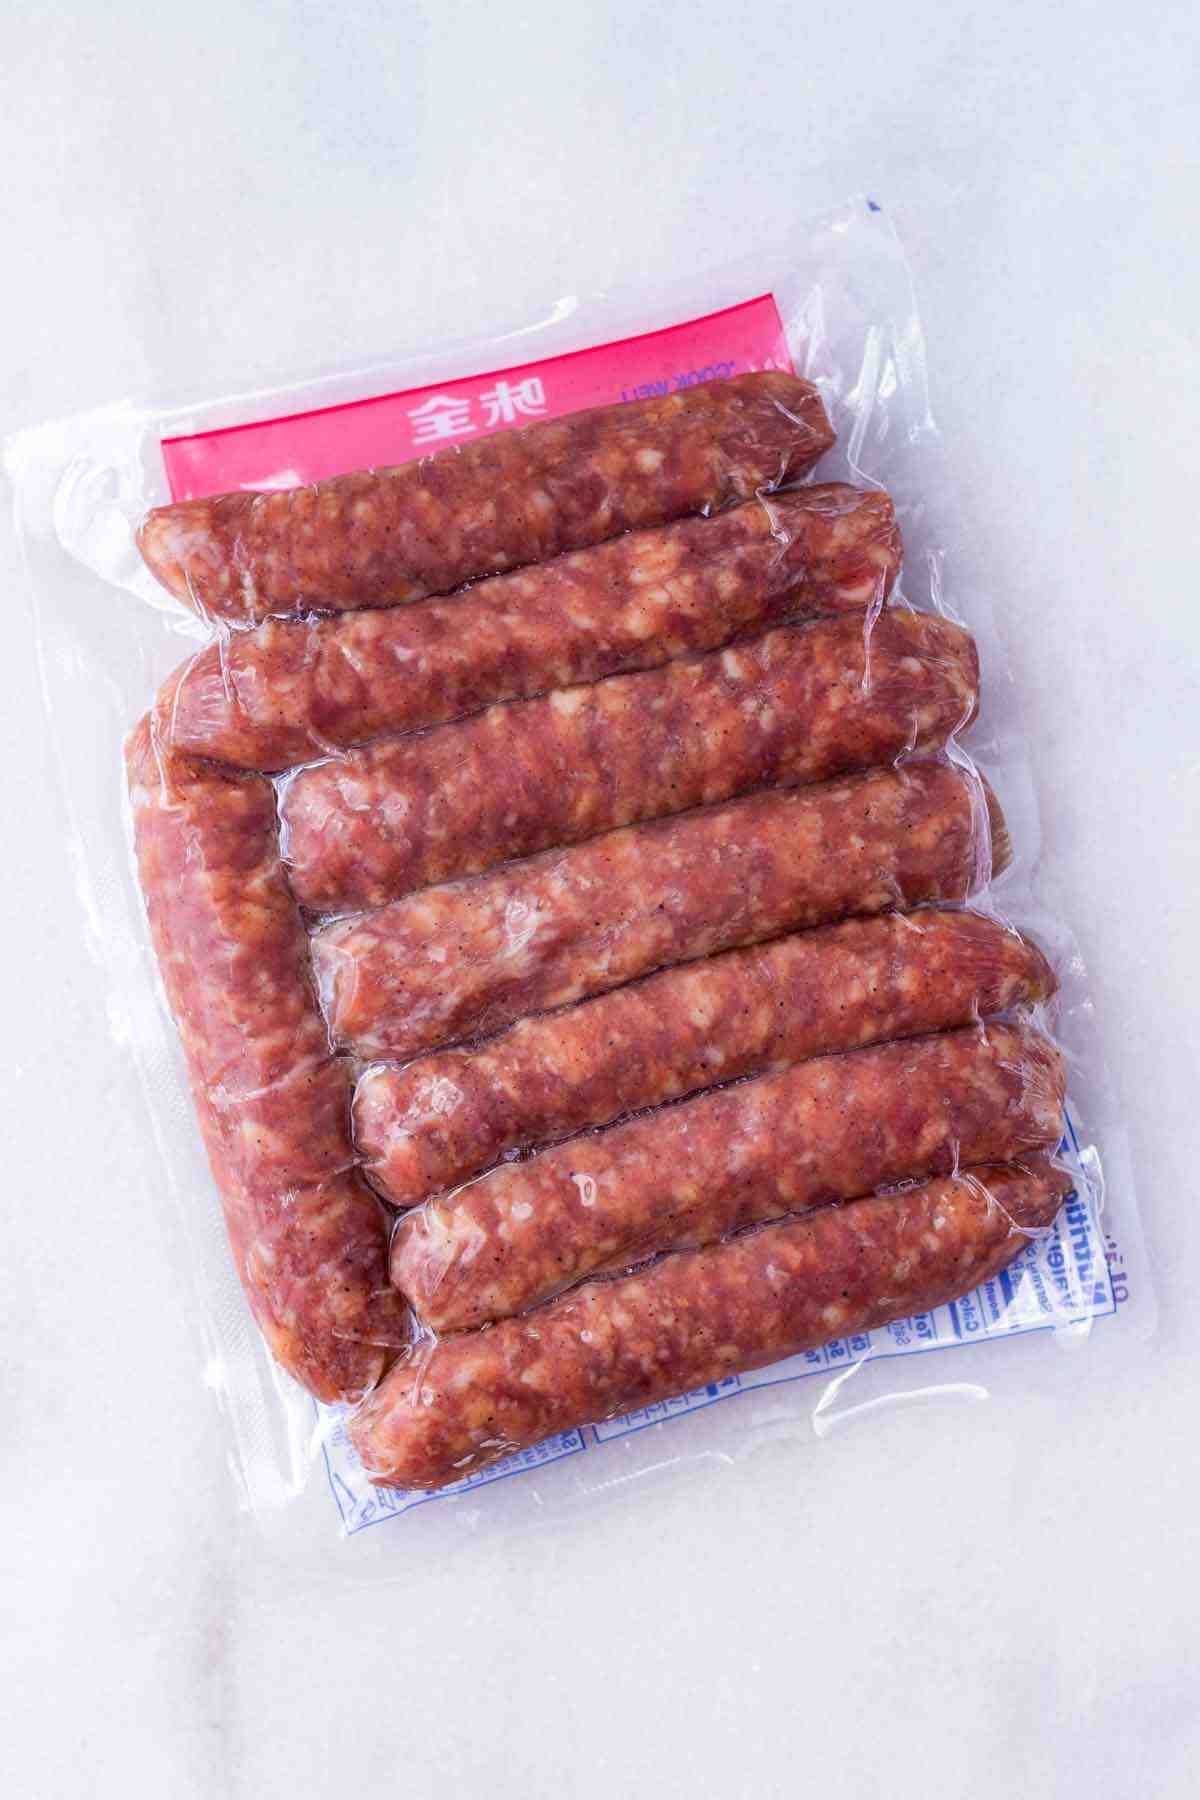 Can you eat sausage casing?